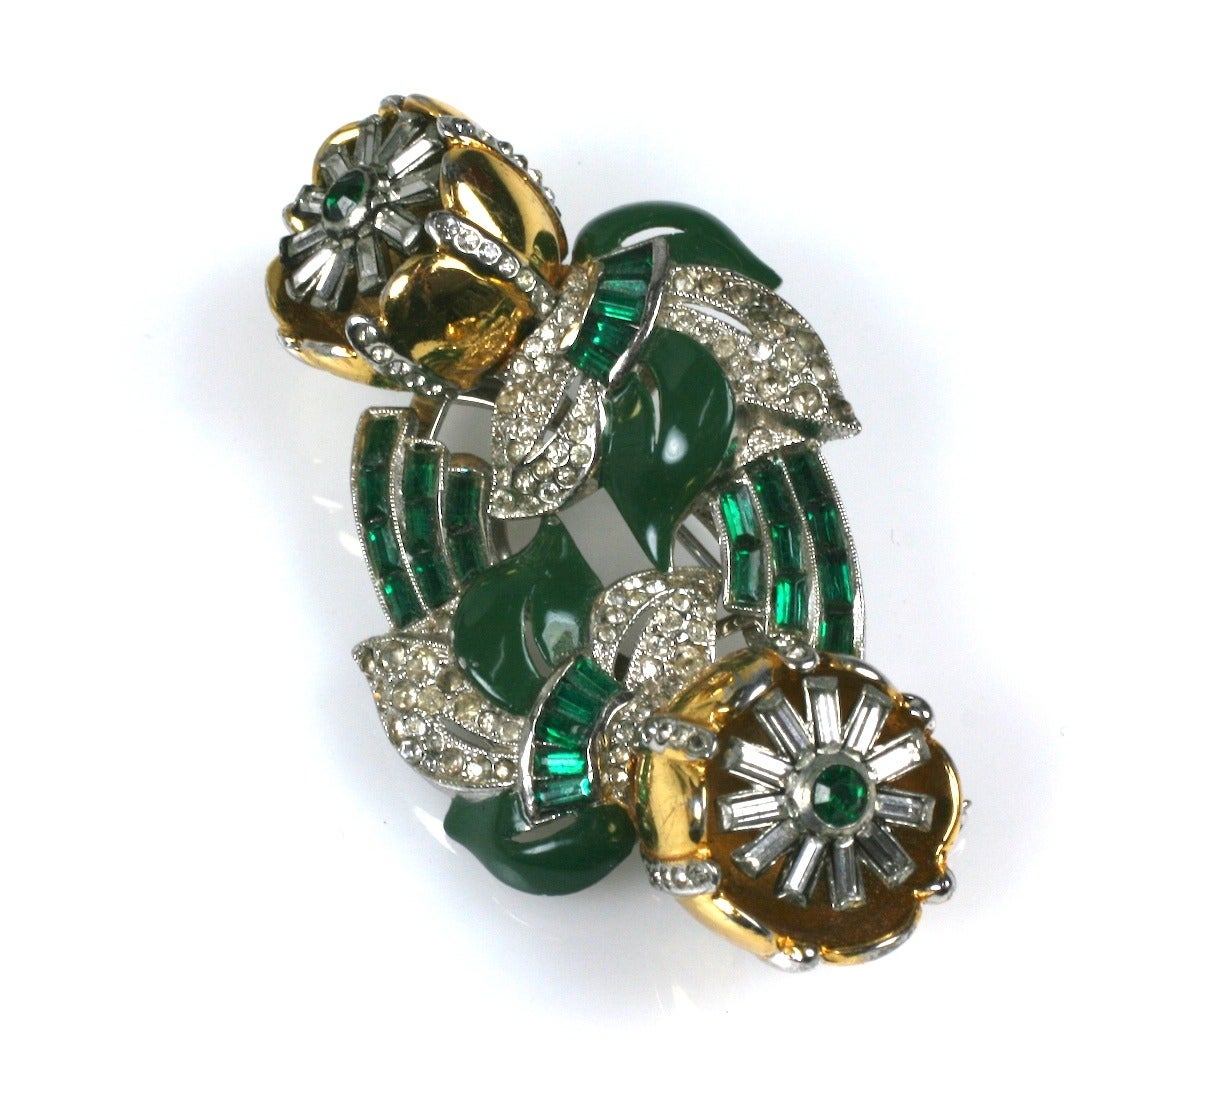 Coro classic flower twist tremblant duette brooch of gilt metal, green enamel,  rare emerald crystal baguettes and crystal pastes. Both flower clips separate off base to be worn separately. 1940's USA. Excellent condition. 
Length  3